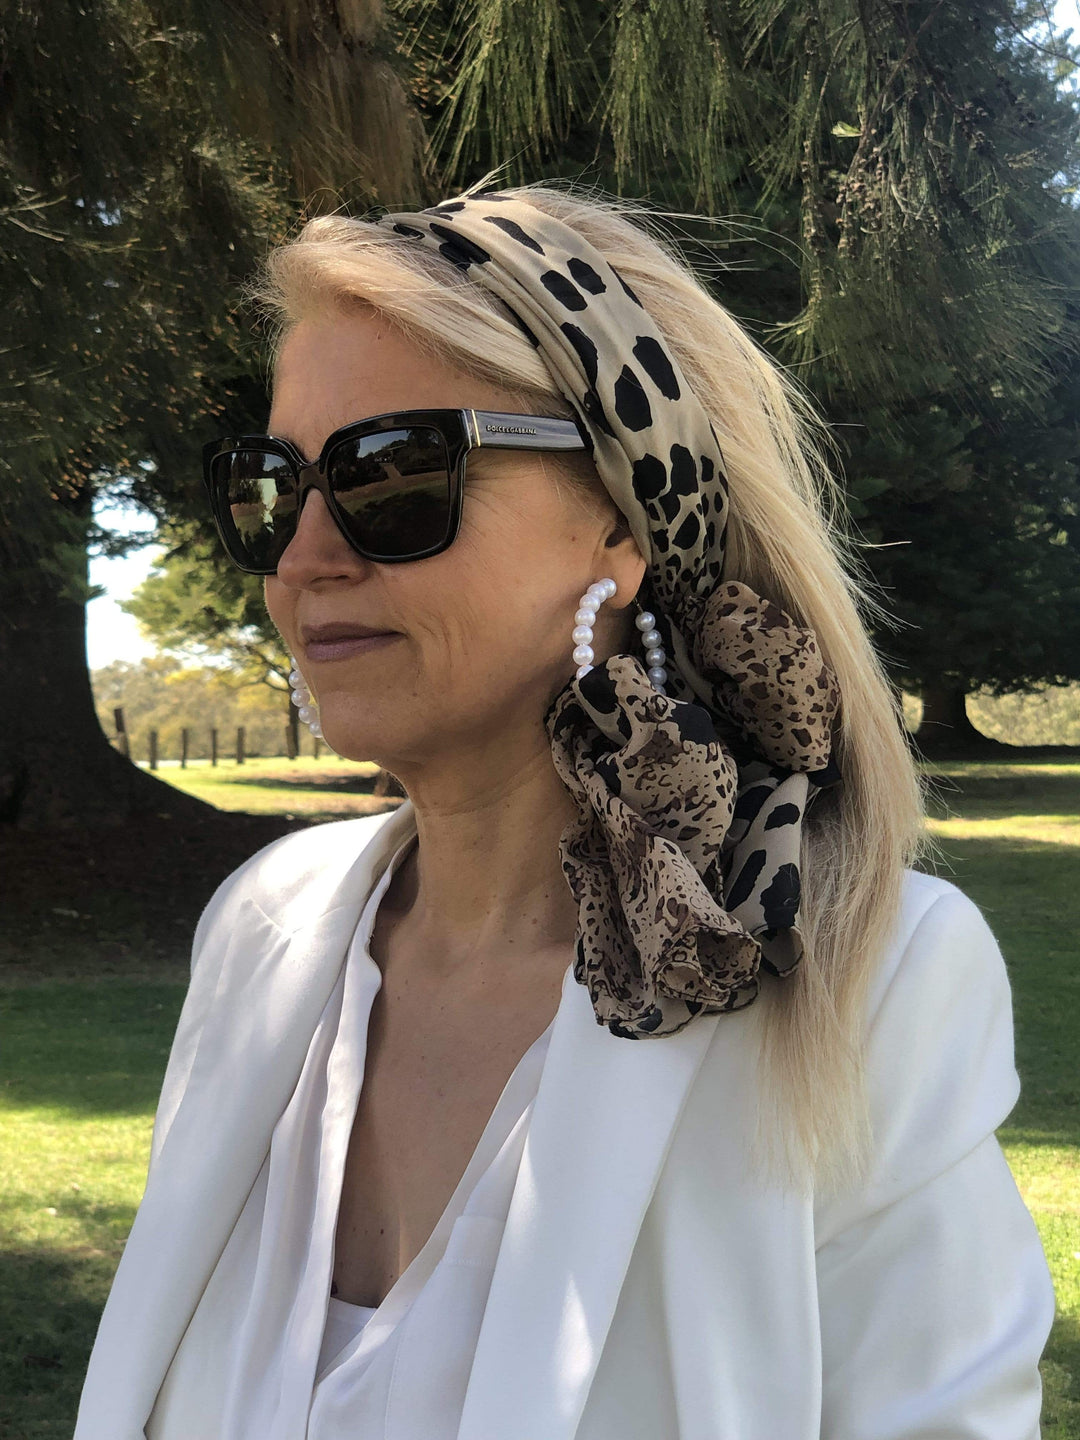 LIGHTWEIGHT SCARF COLLECTION – Scarves Australia